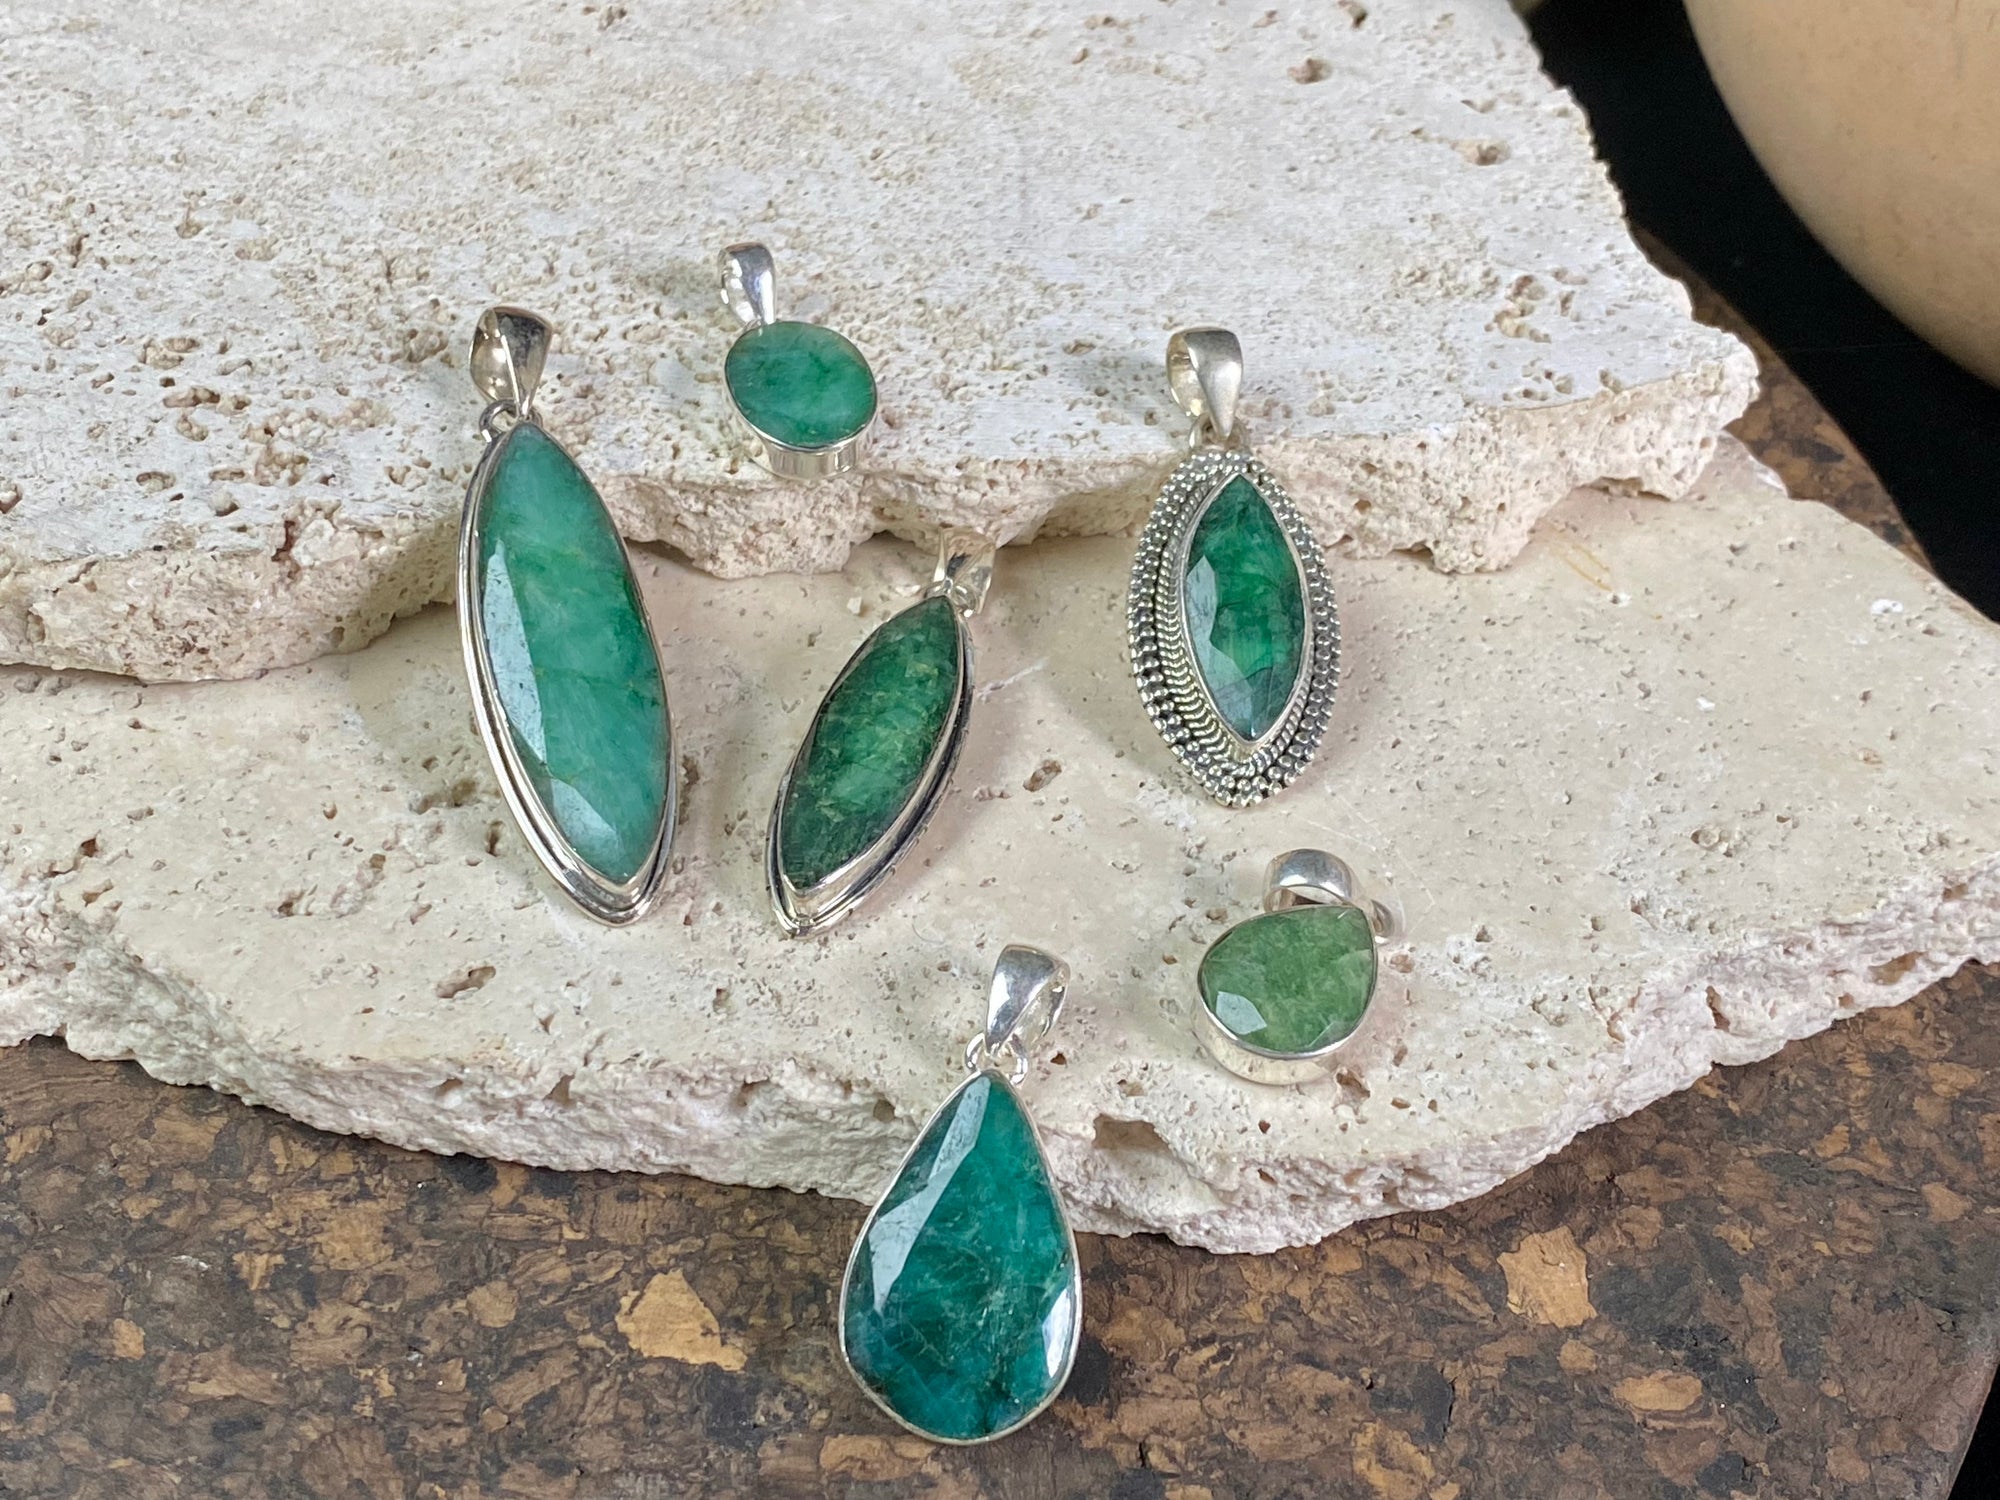 Six lush natural emerald pendants featuring large facet cut stones set in sterling silver. All are set with generous bails to fit on even the largest of chains, torcs or cords. Ranging in length from 6 cm to 2.8 cm